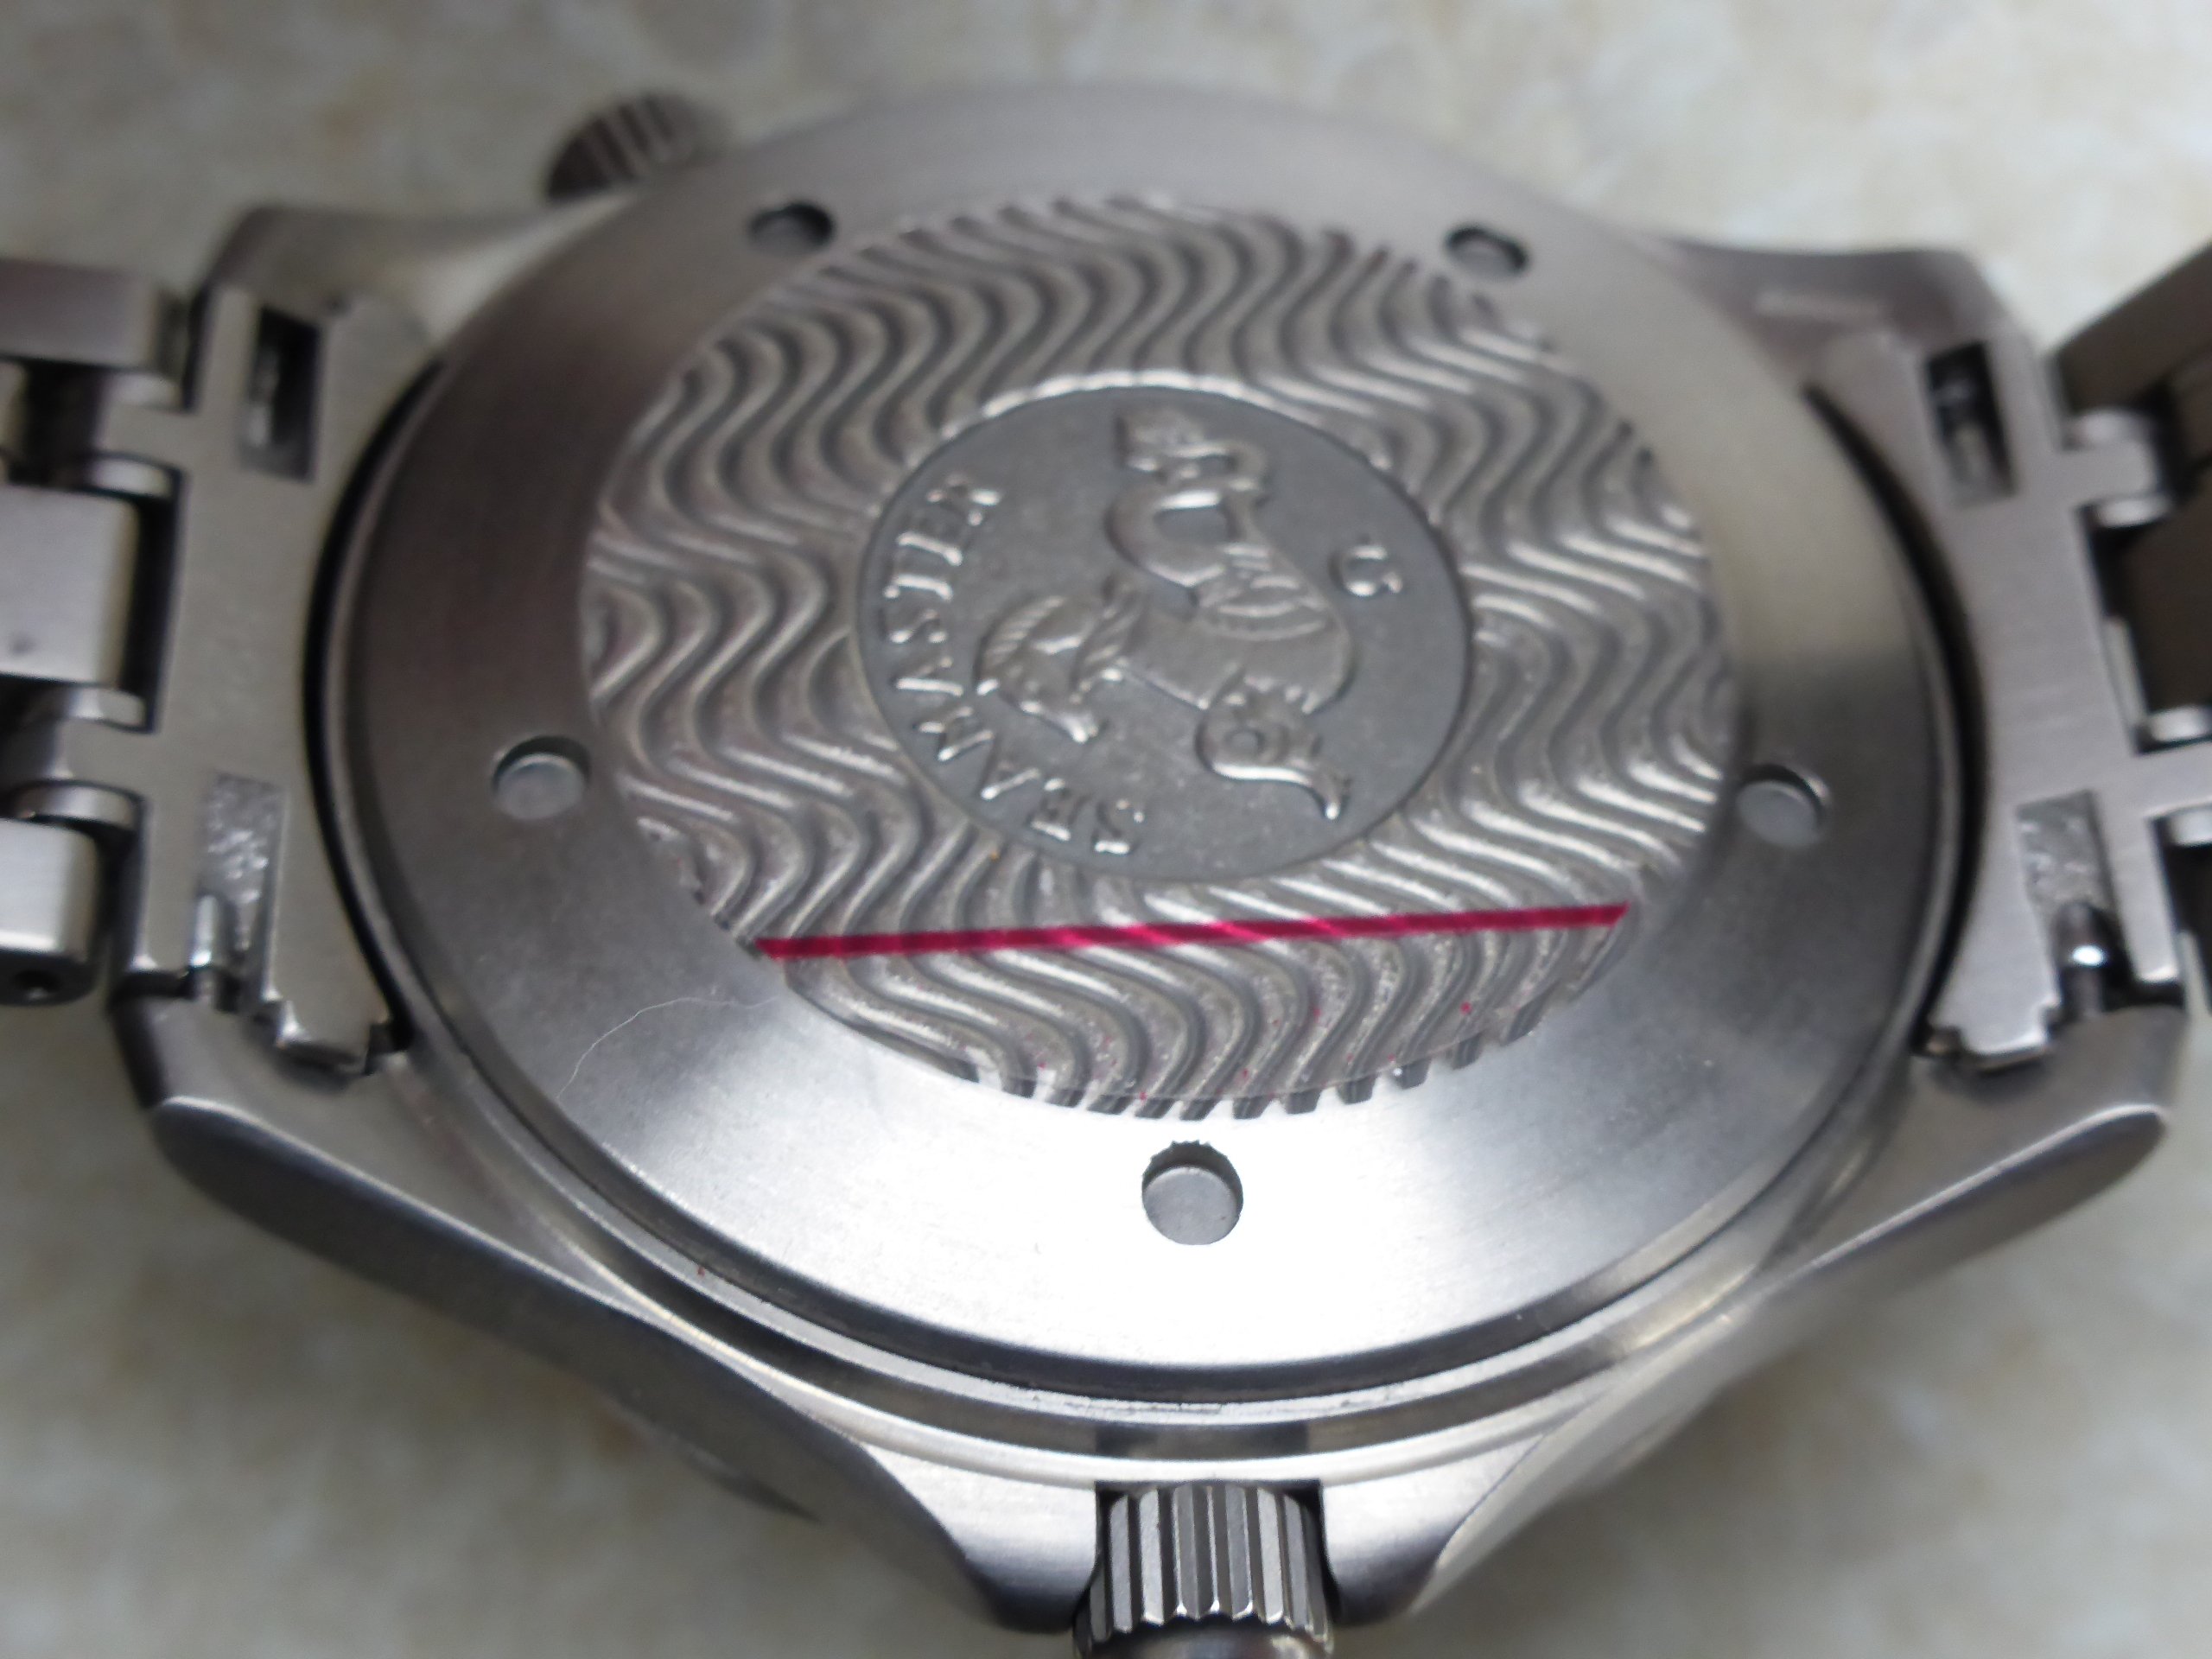 Number omega watch check serial Serial Numbers